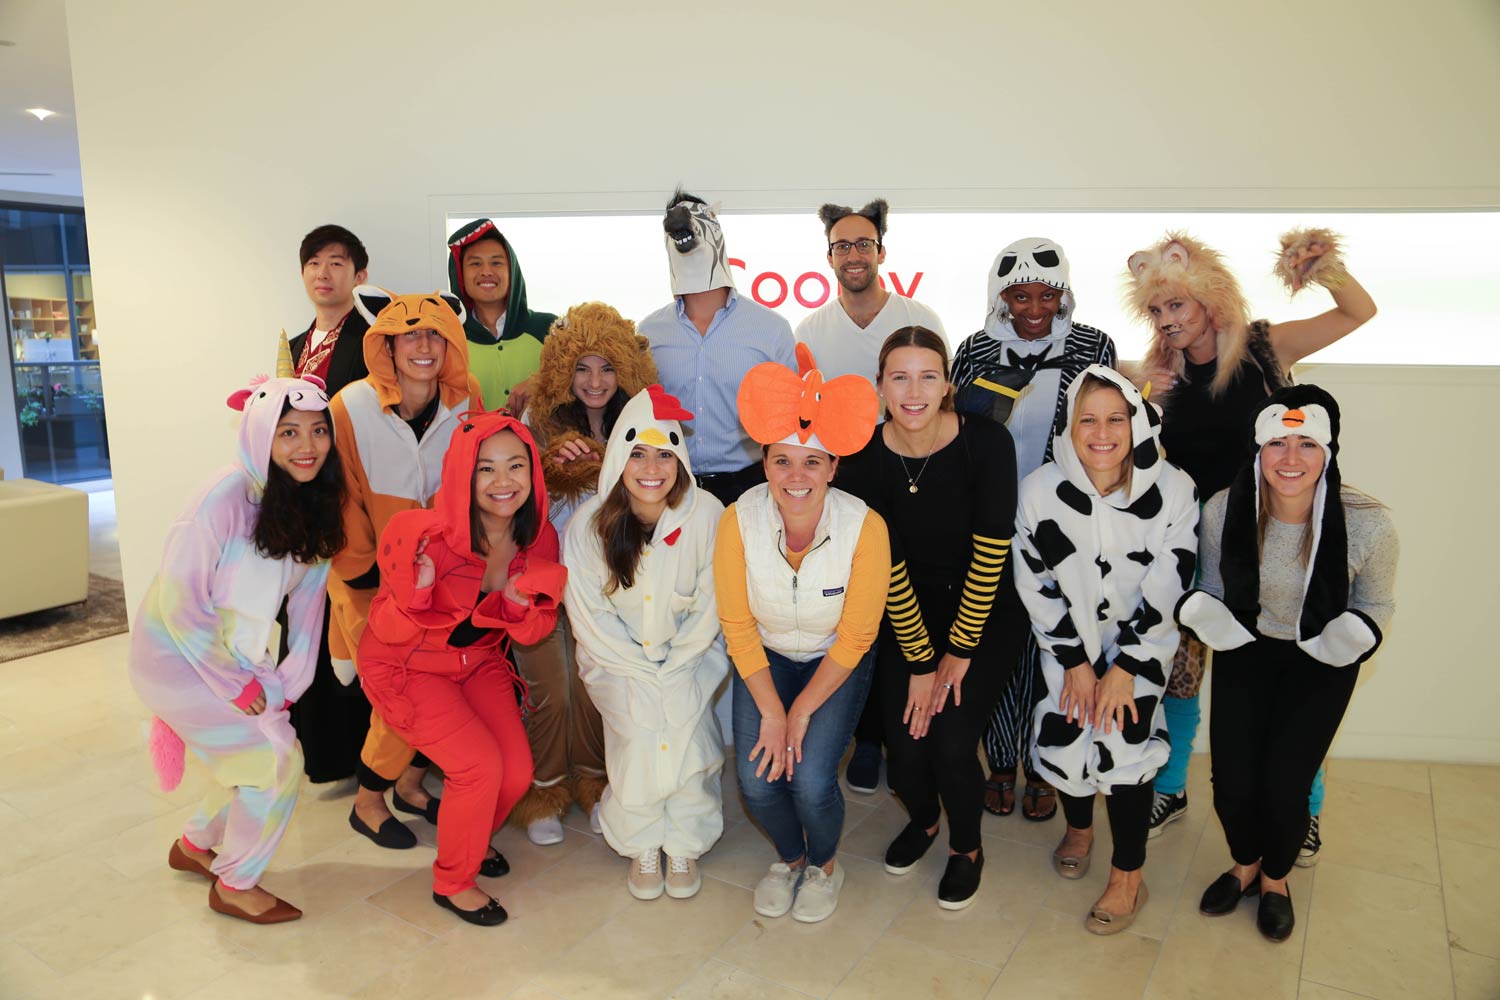 Across the firm, ​Cooley colleagues get into the spirit for Halloween.